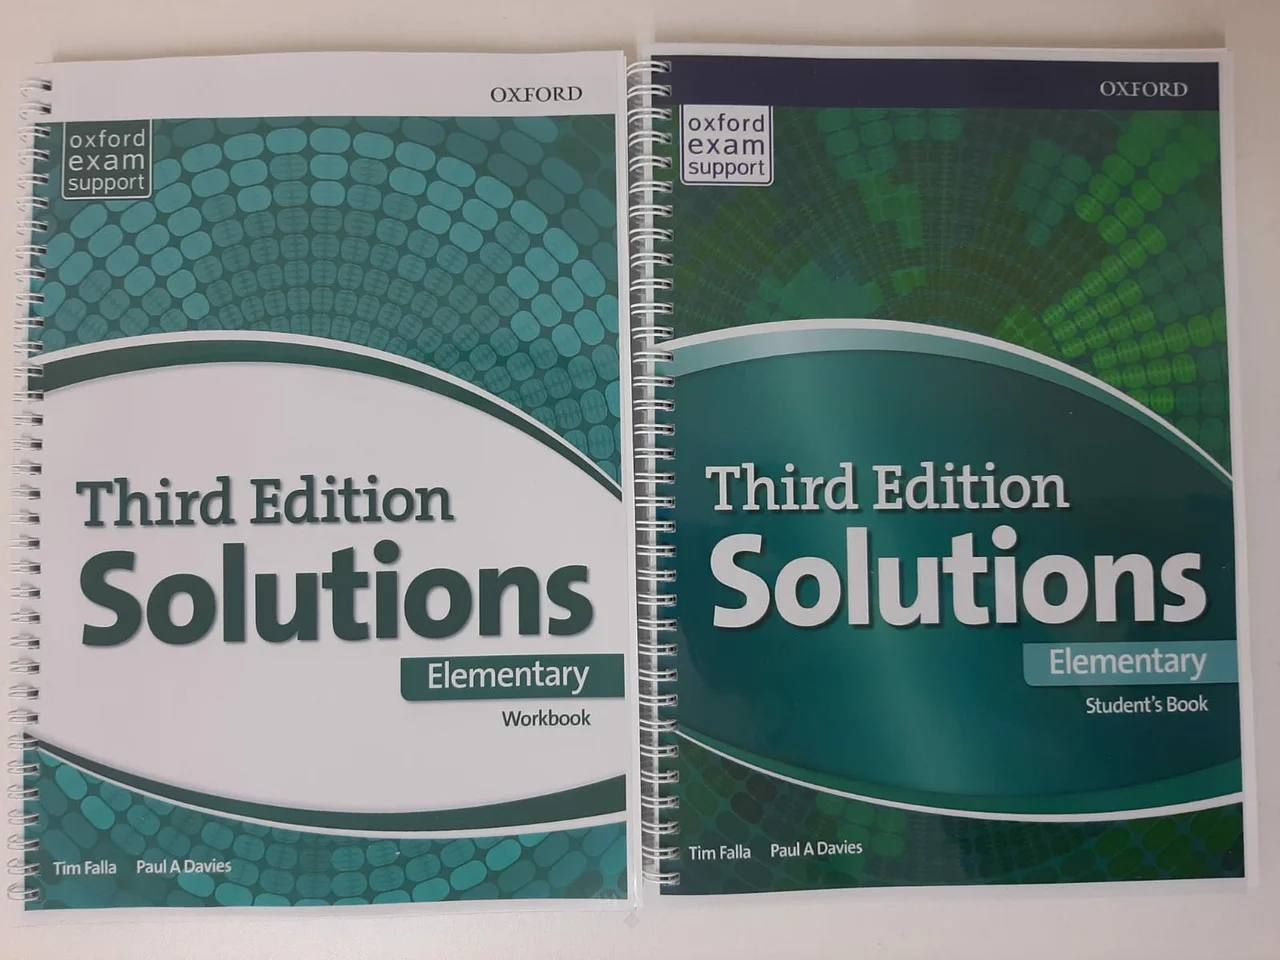 Solutions elementary tests. Solutions Elementary 3rd Edition. Solutions: Elementary. Solutions third Edition Elementary Tests.